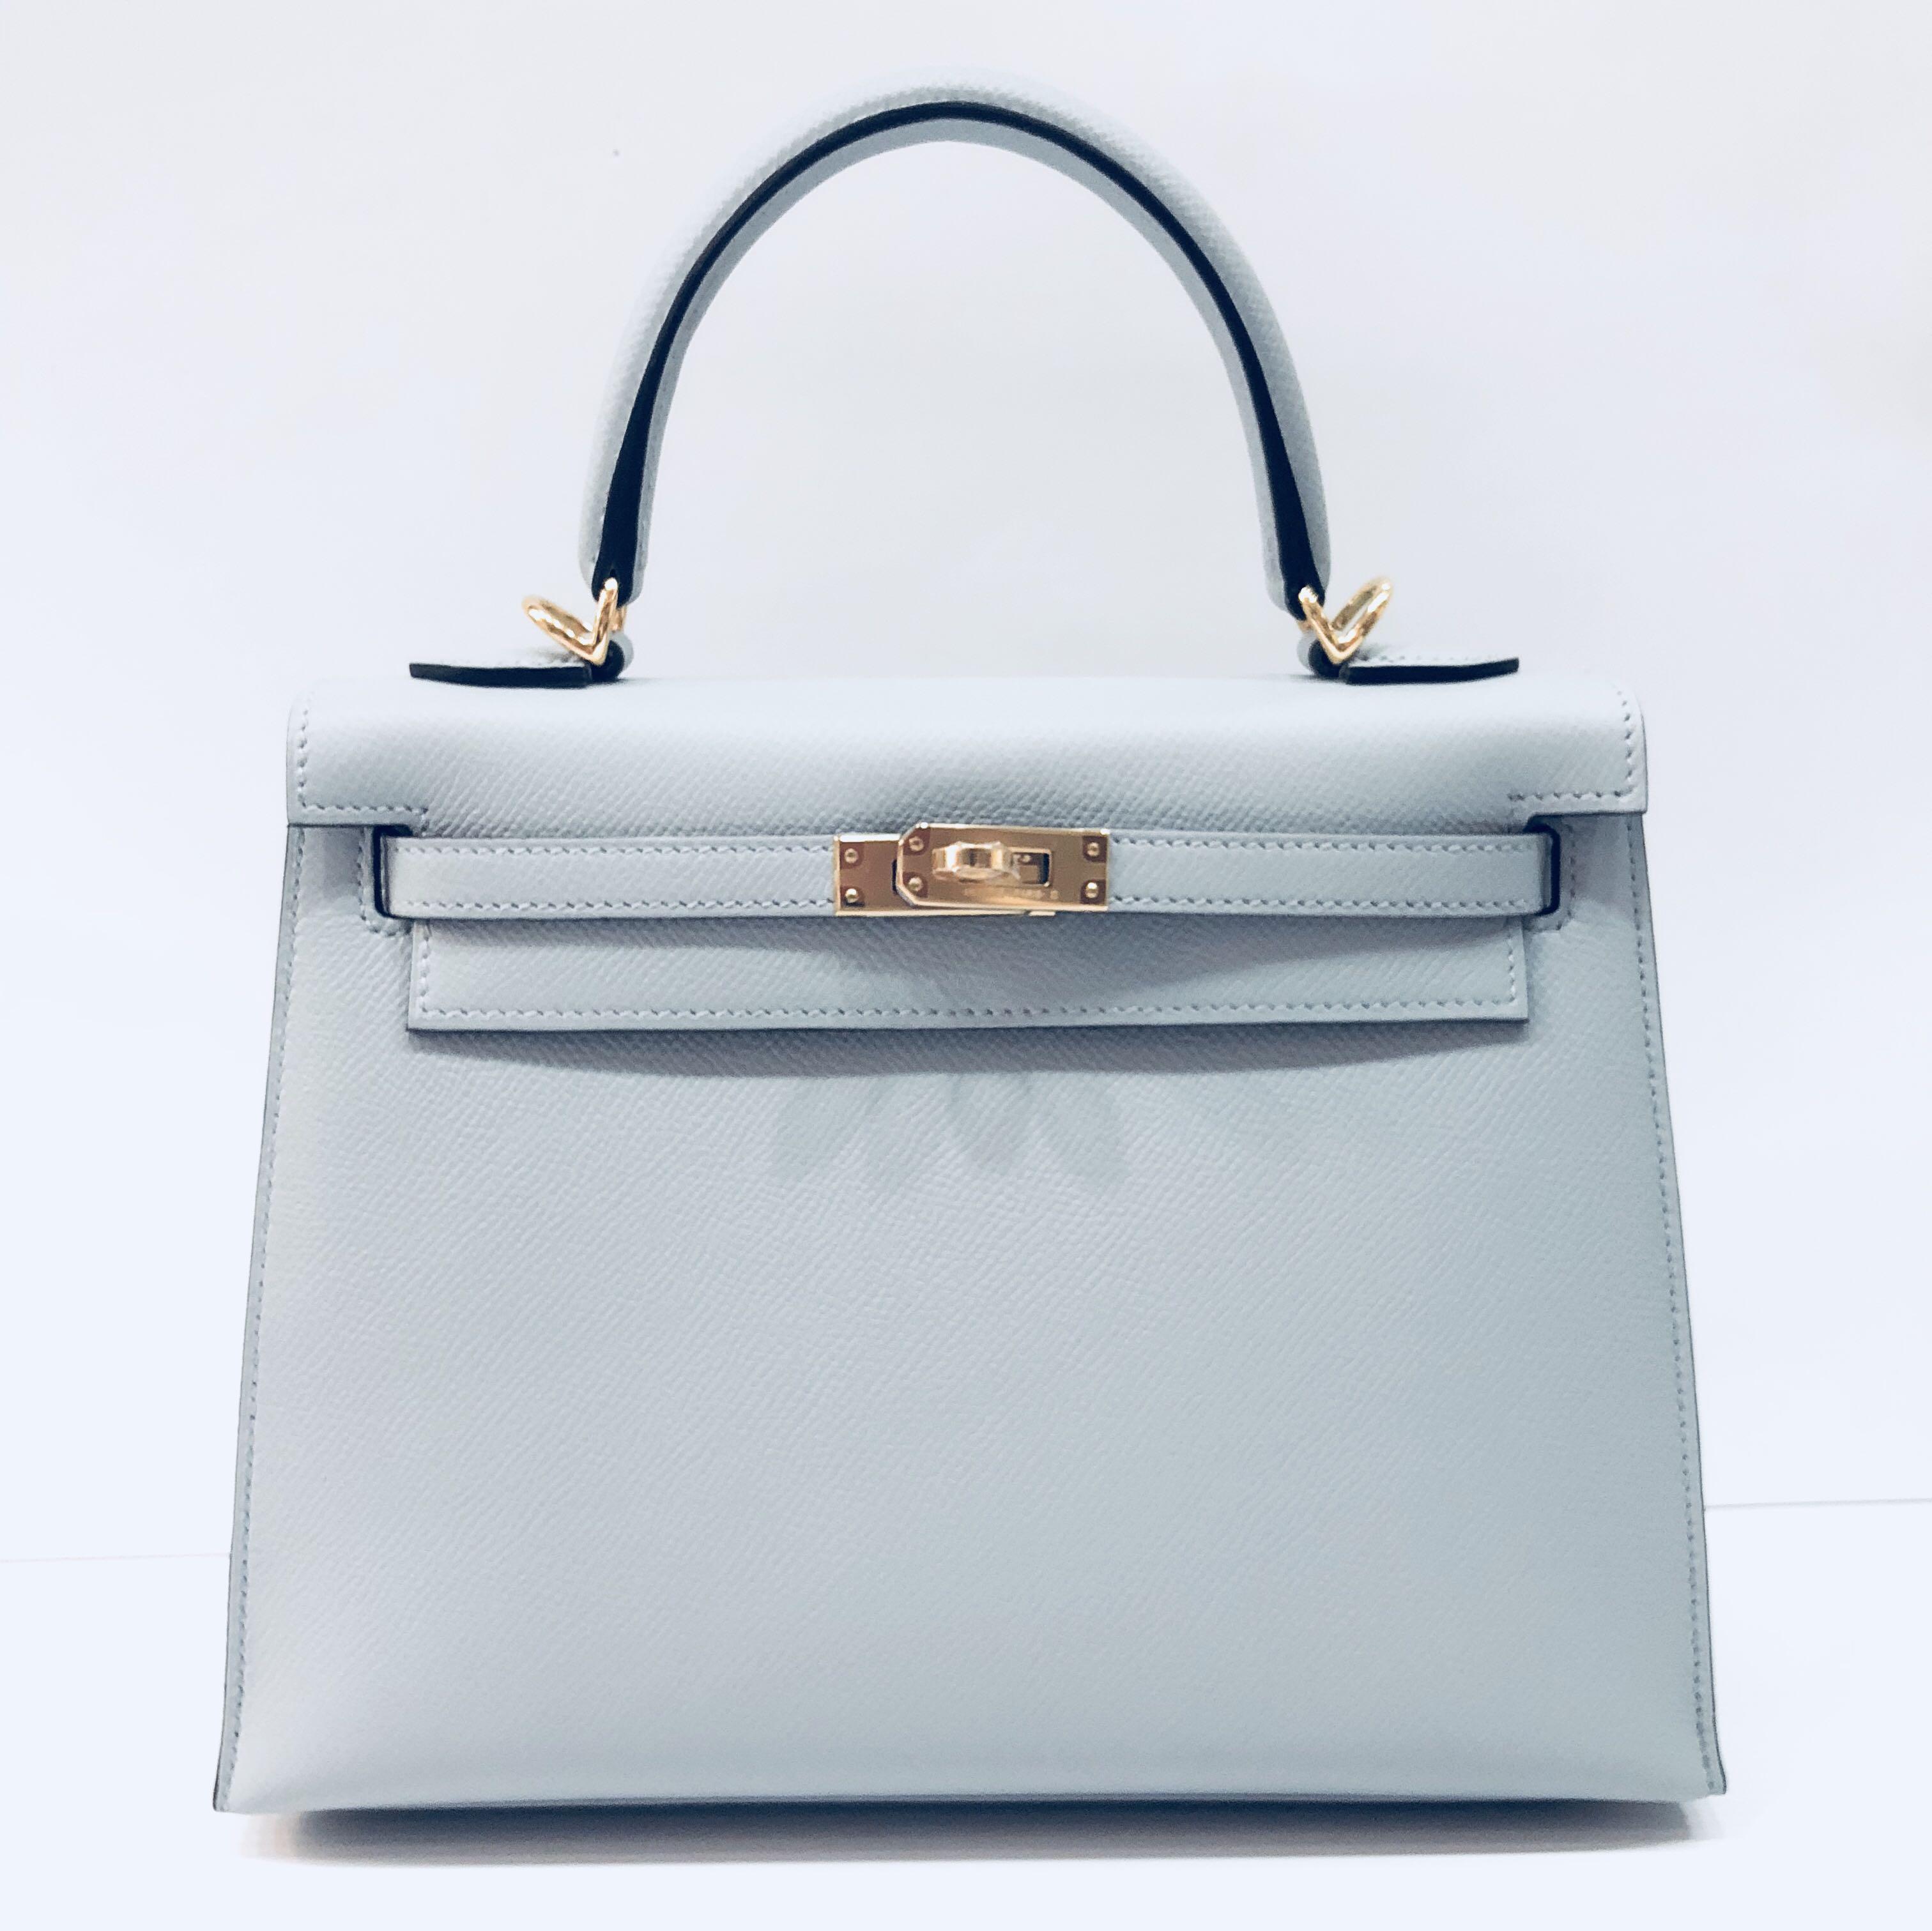 Hermes - Blue Glacier Kelly 25 Sellier in Veau Epsom with GHW